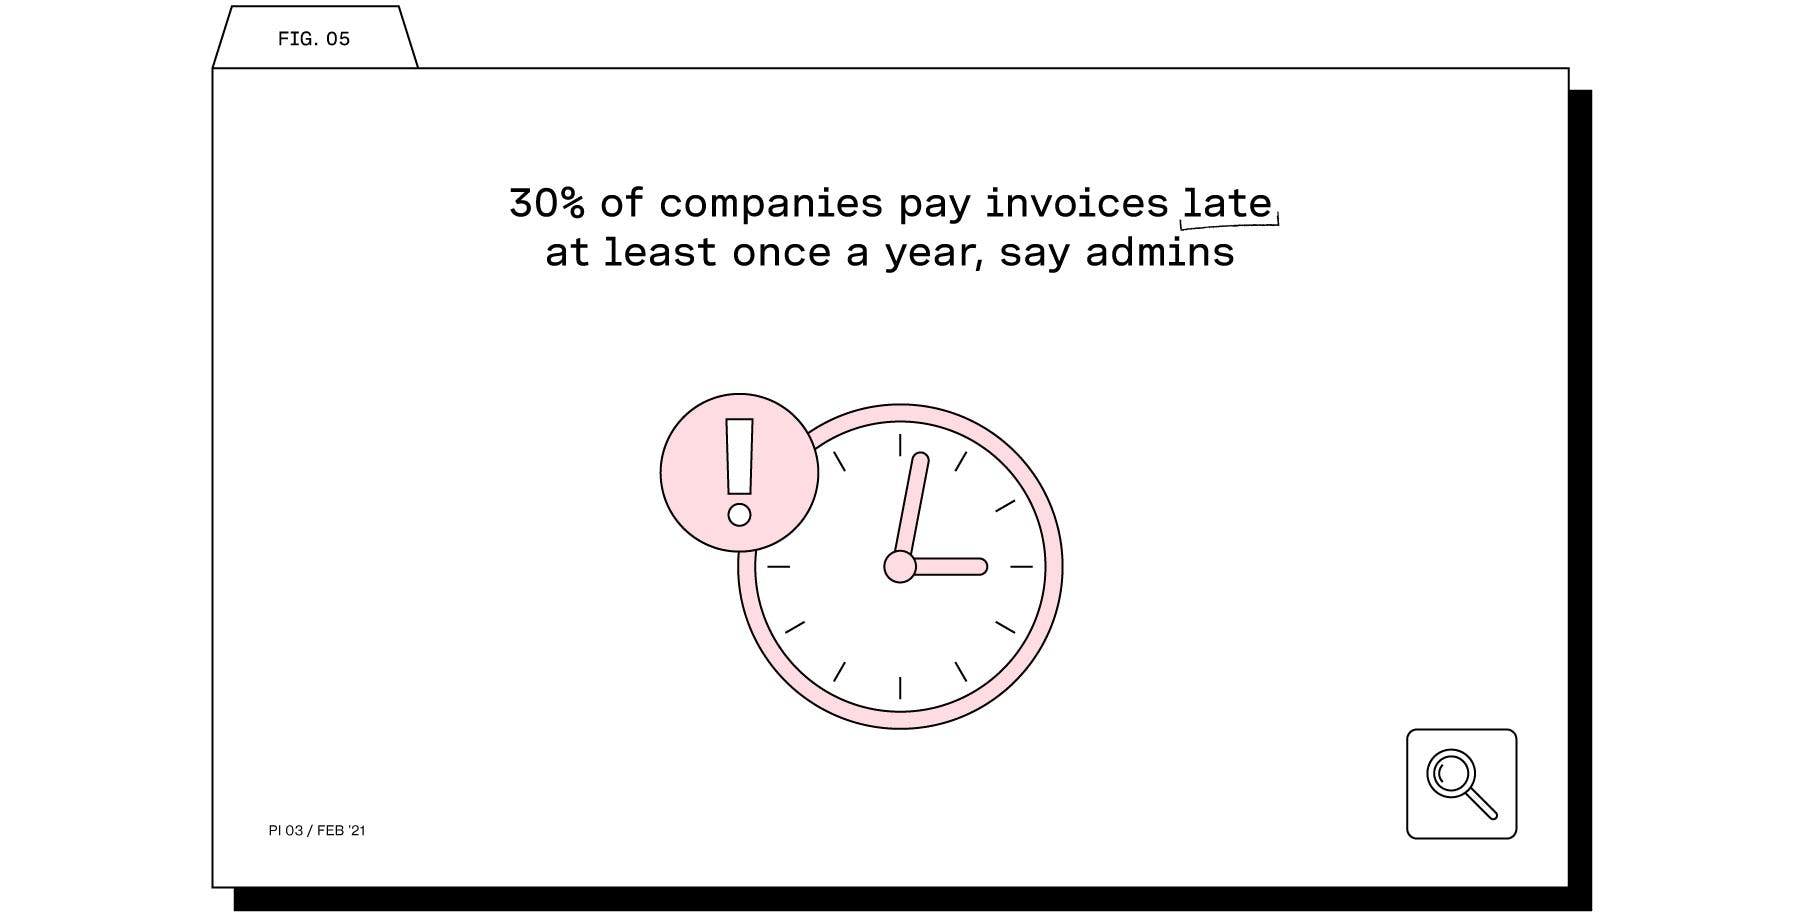 Late invoice payments